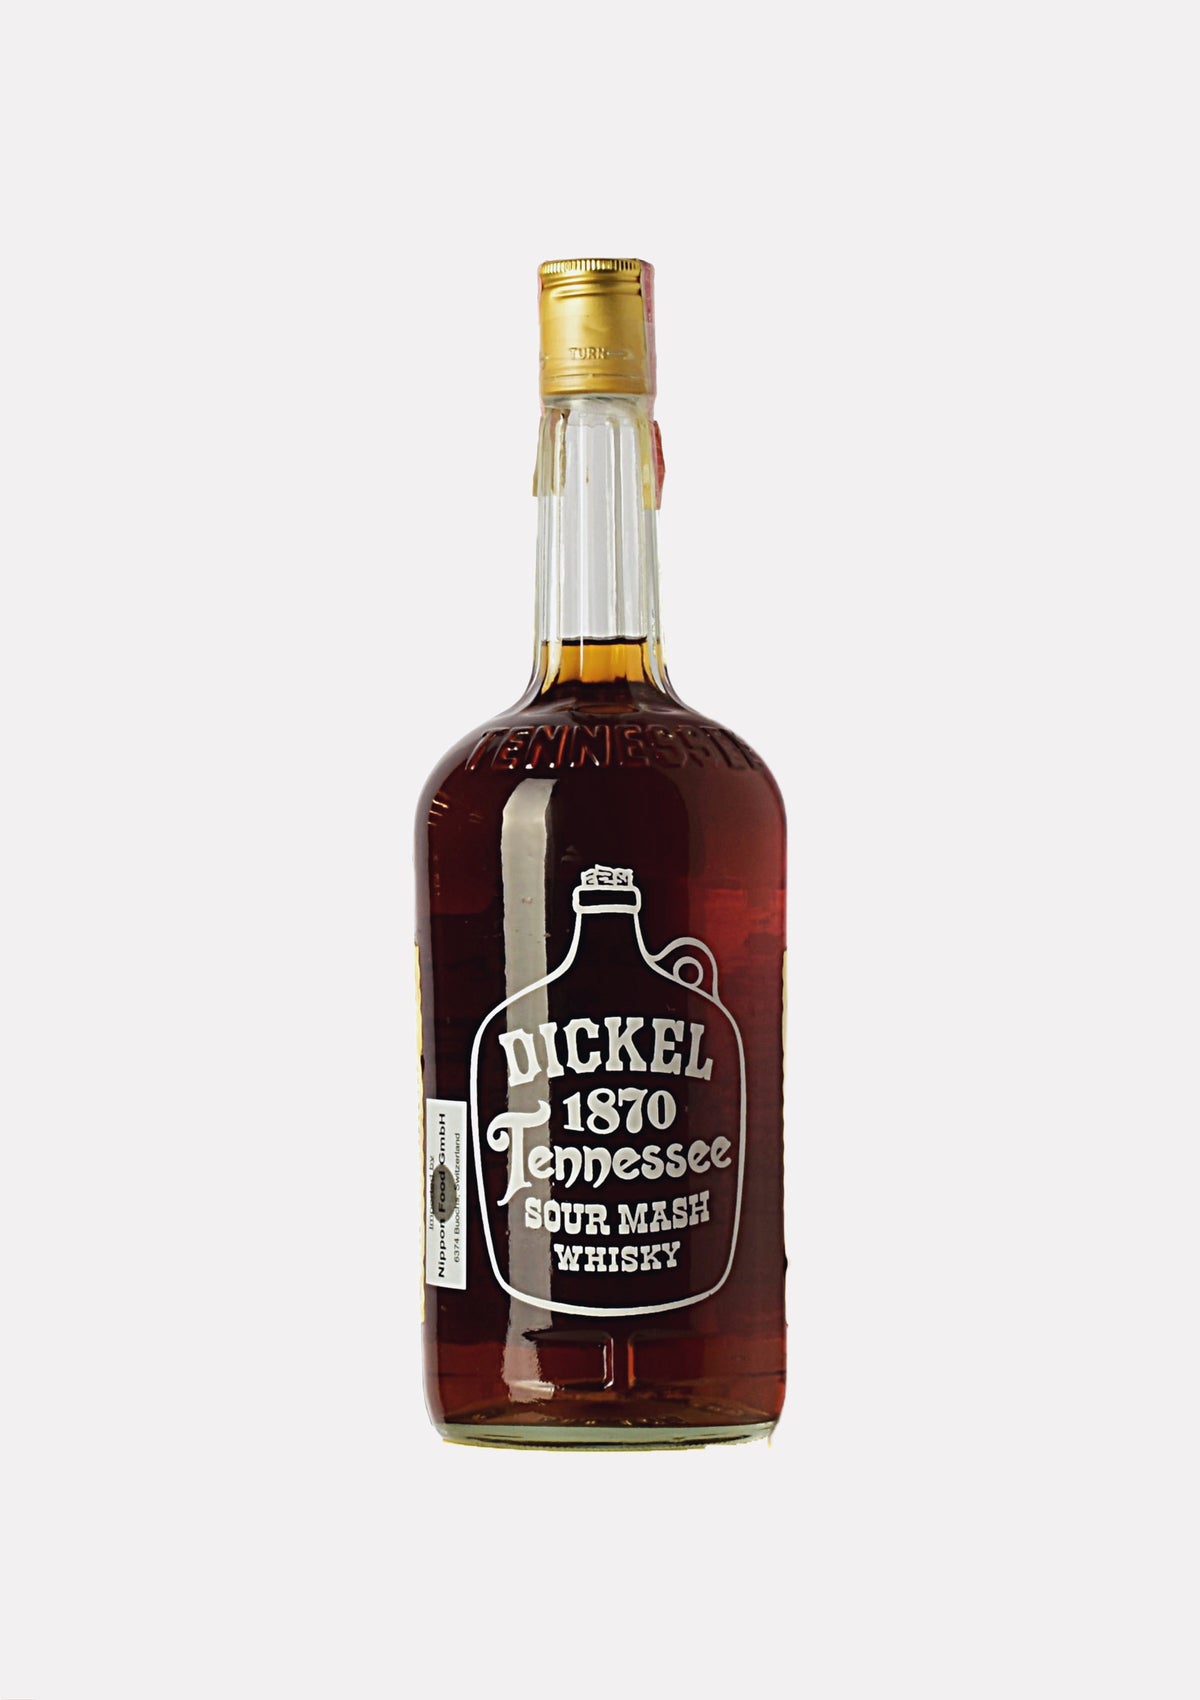 George Dickel Tennessee Sour Mash Whisky Old No. 12 Brand